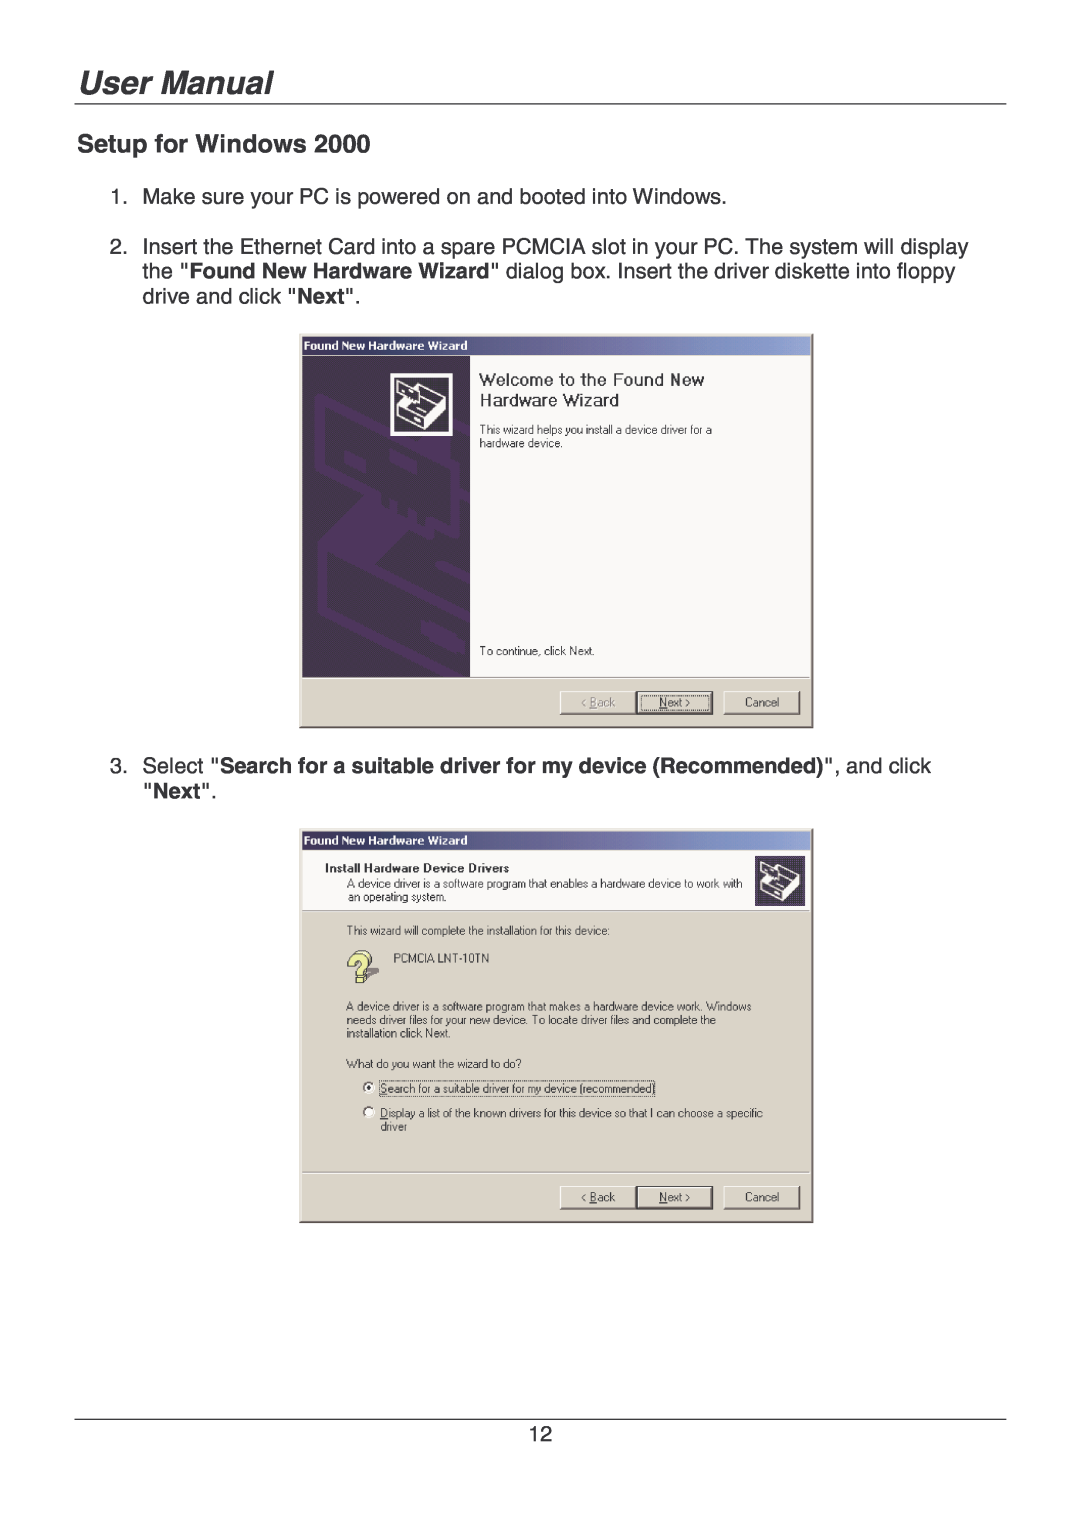 Lindy 70928 user manual Setup for Windows, User Manual, Make sure your PC is powered on and booted into Windows 